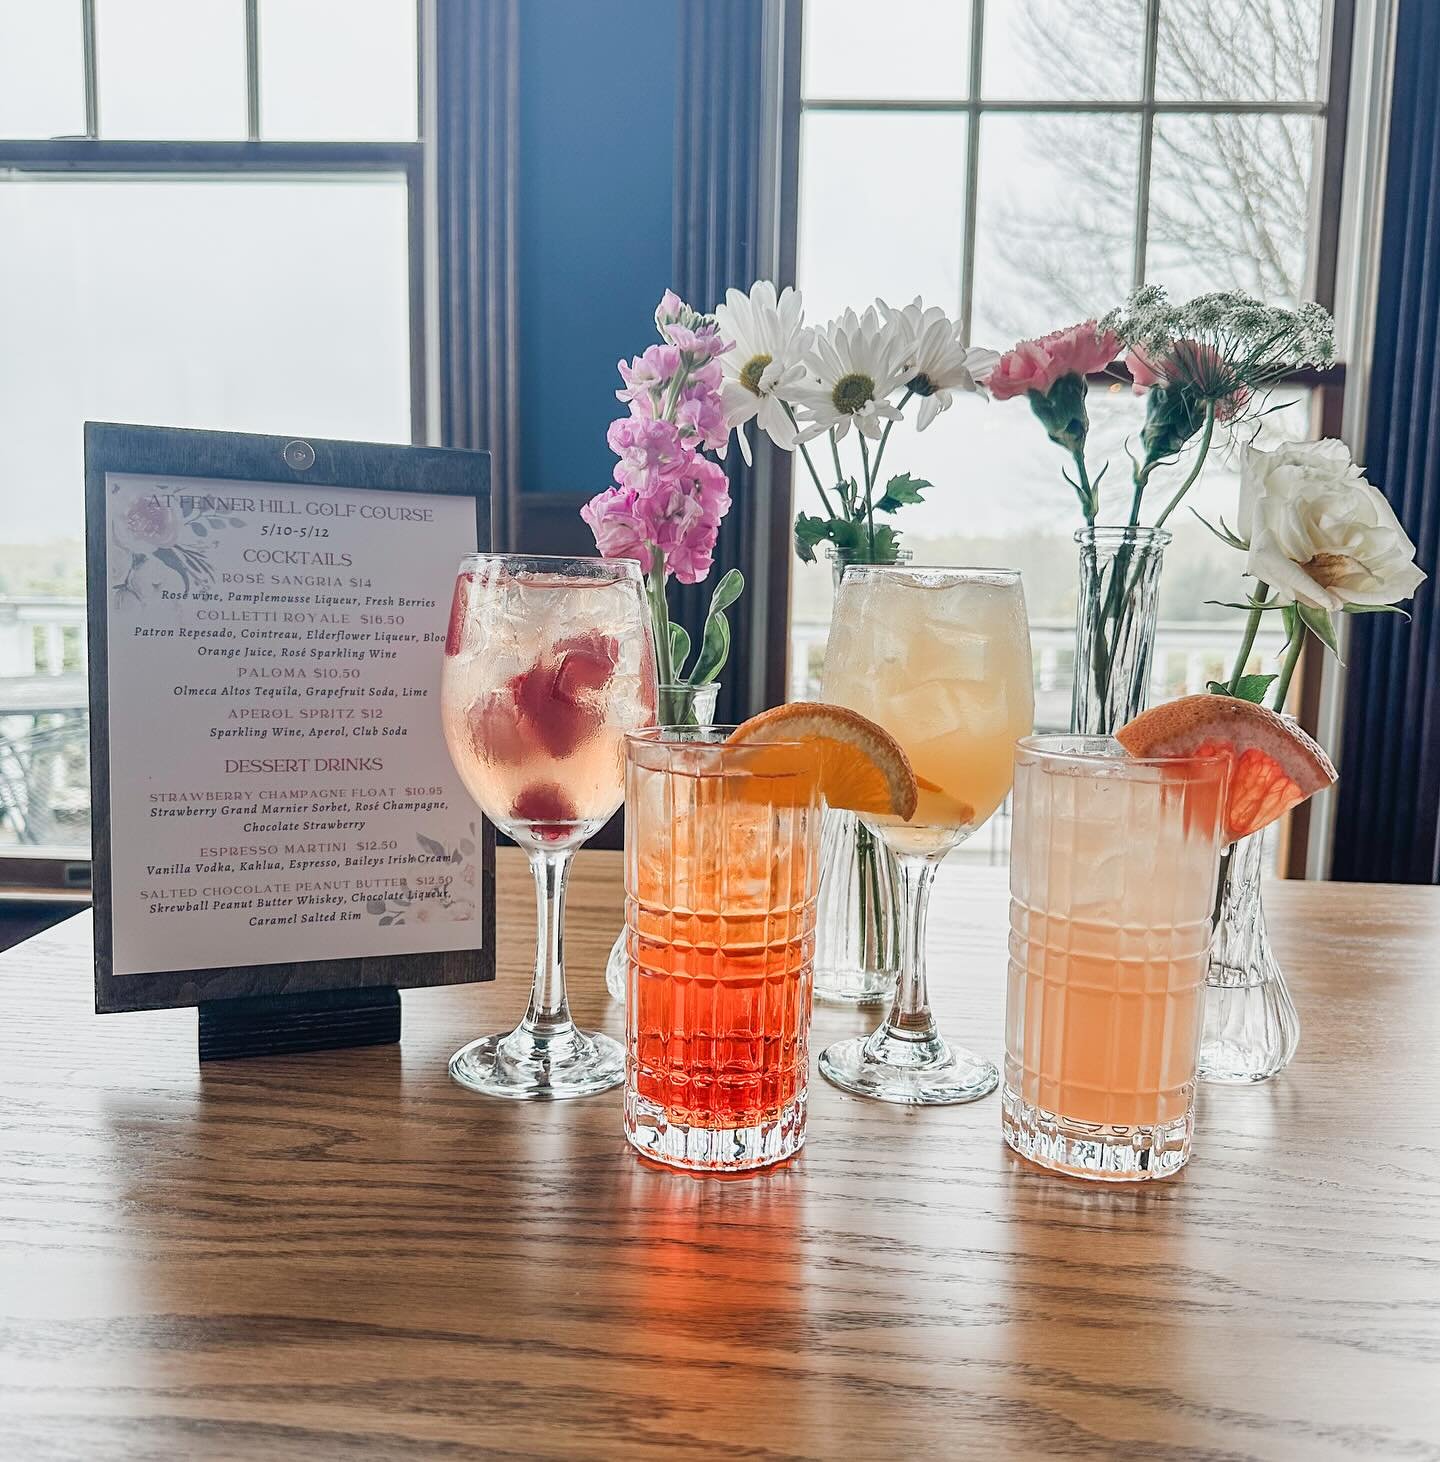 🌺🌹🌸 We&rsquo;re kicking off Mother&rsquo;s Day Weekend with our favorite parts of every meal - Drinks and Dessert! 🍰🍷

Come join us for craft cocktails, delicious entrees and decedent desserts.

Spots are filling up this weekend so if you wanted